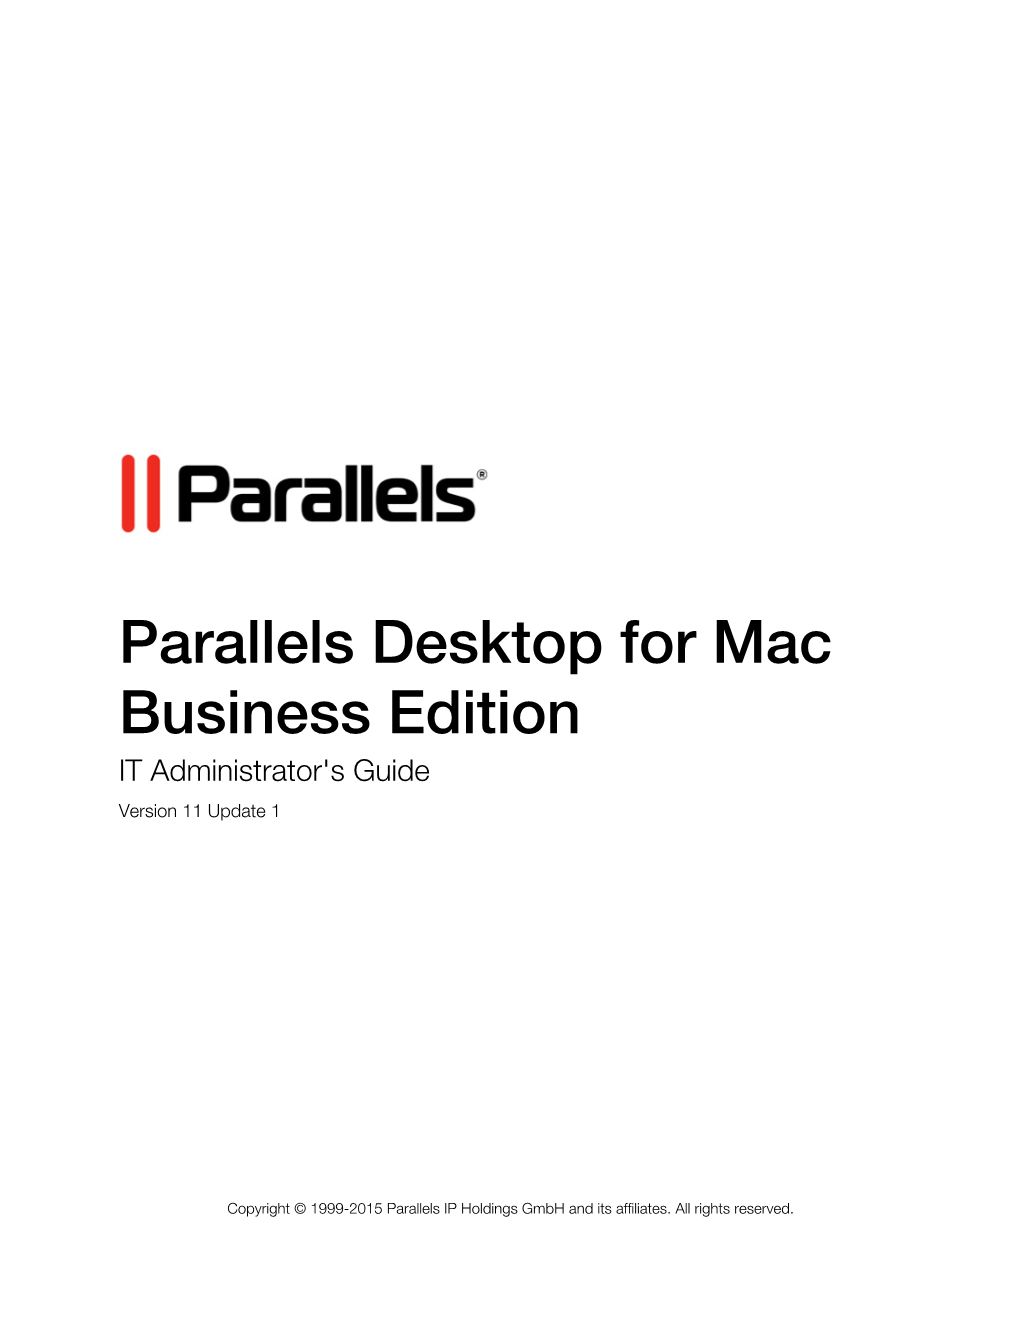 Parallels Desktop for Mac Business Edition IT Administrator's Guide Version 11 Update 1